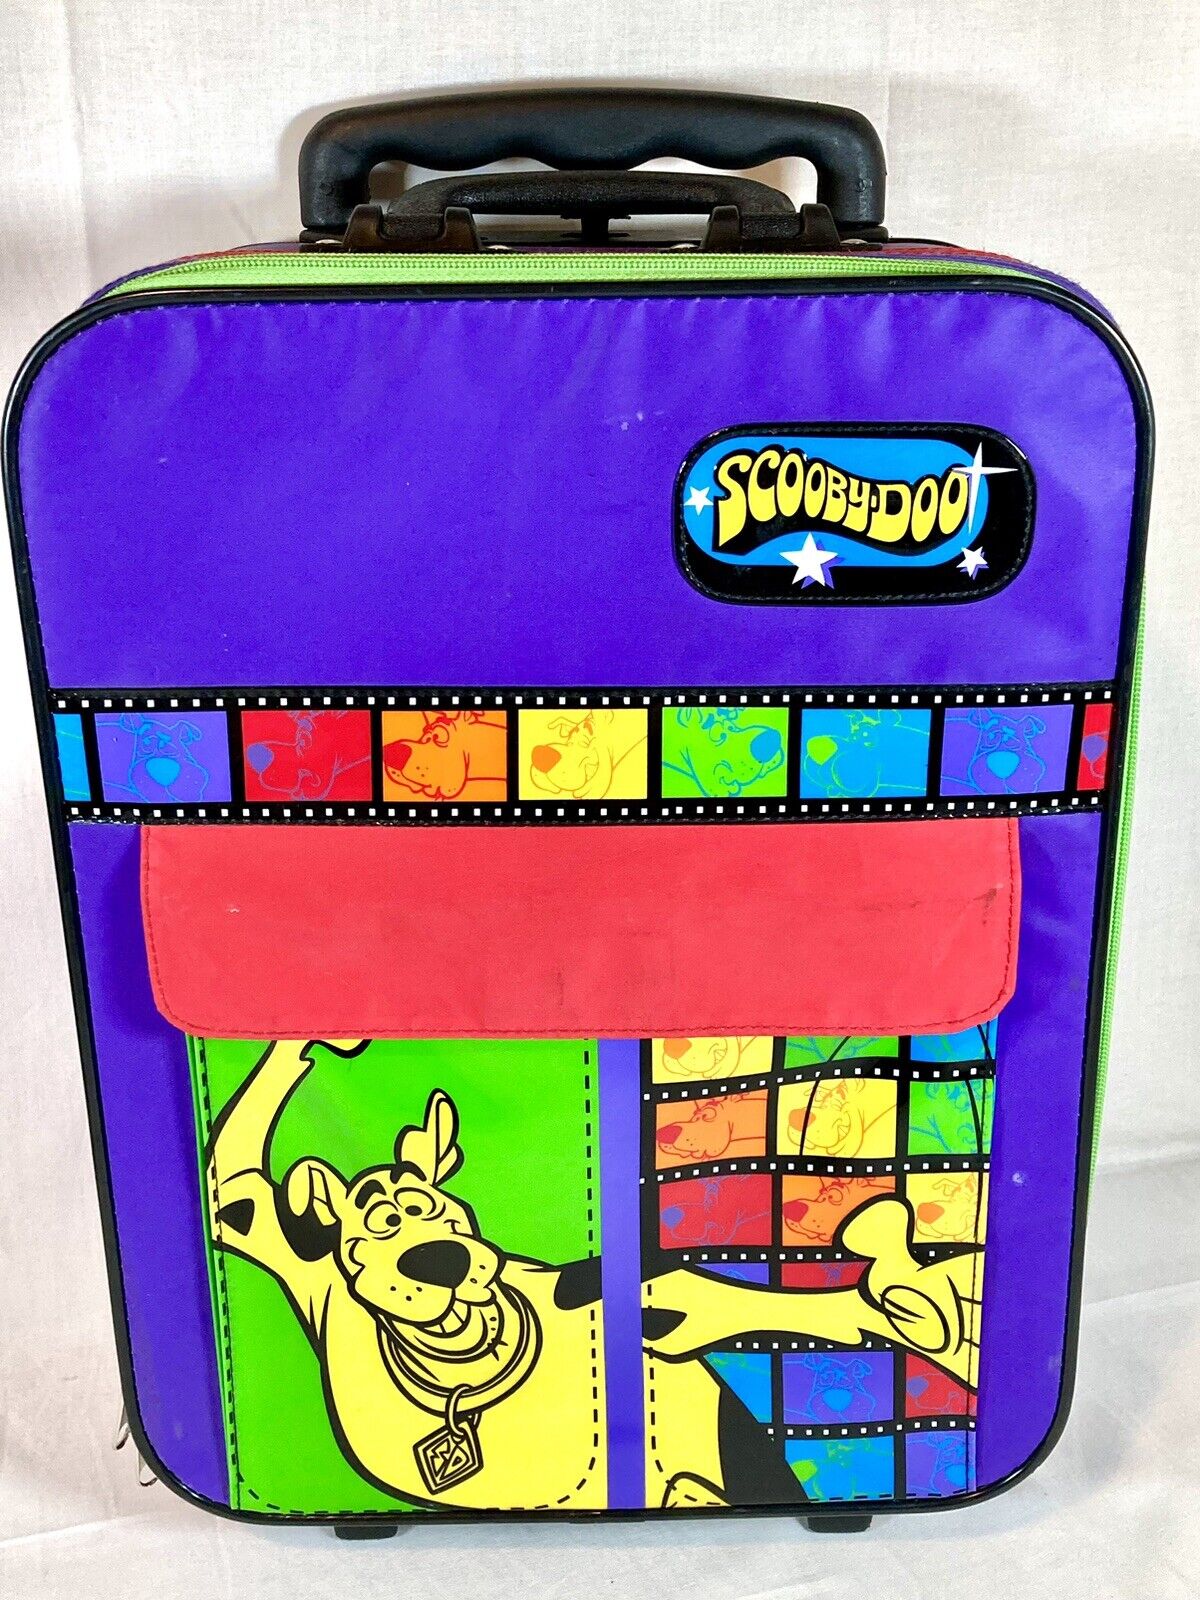 Vintage 2000 Scooby Doo Rolling Suitcase Carry On Luggage Bag Wheelie Cartoon